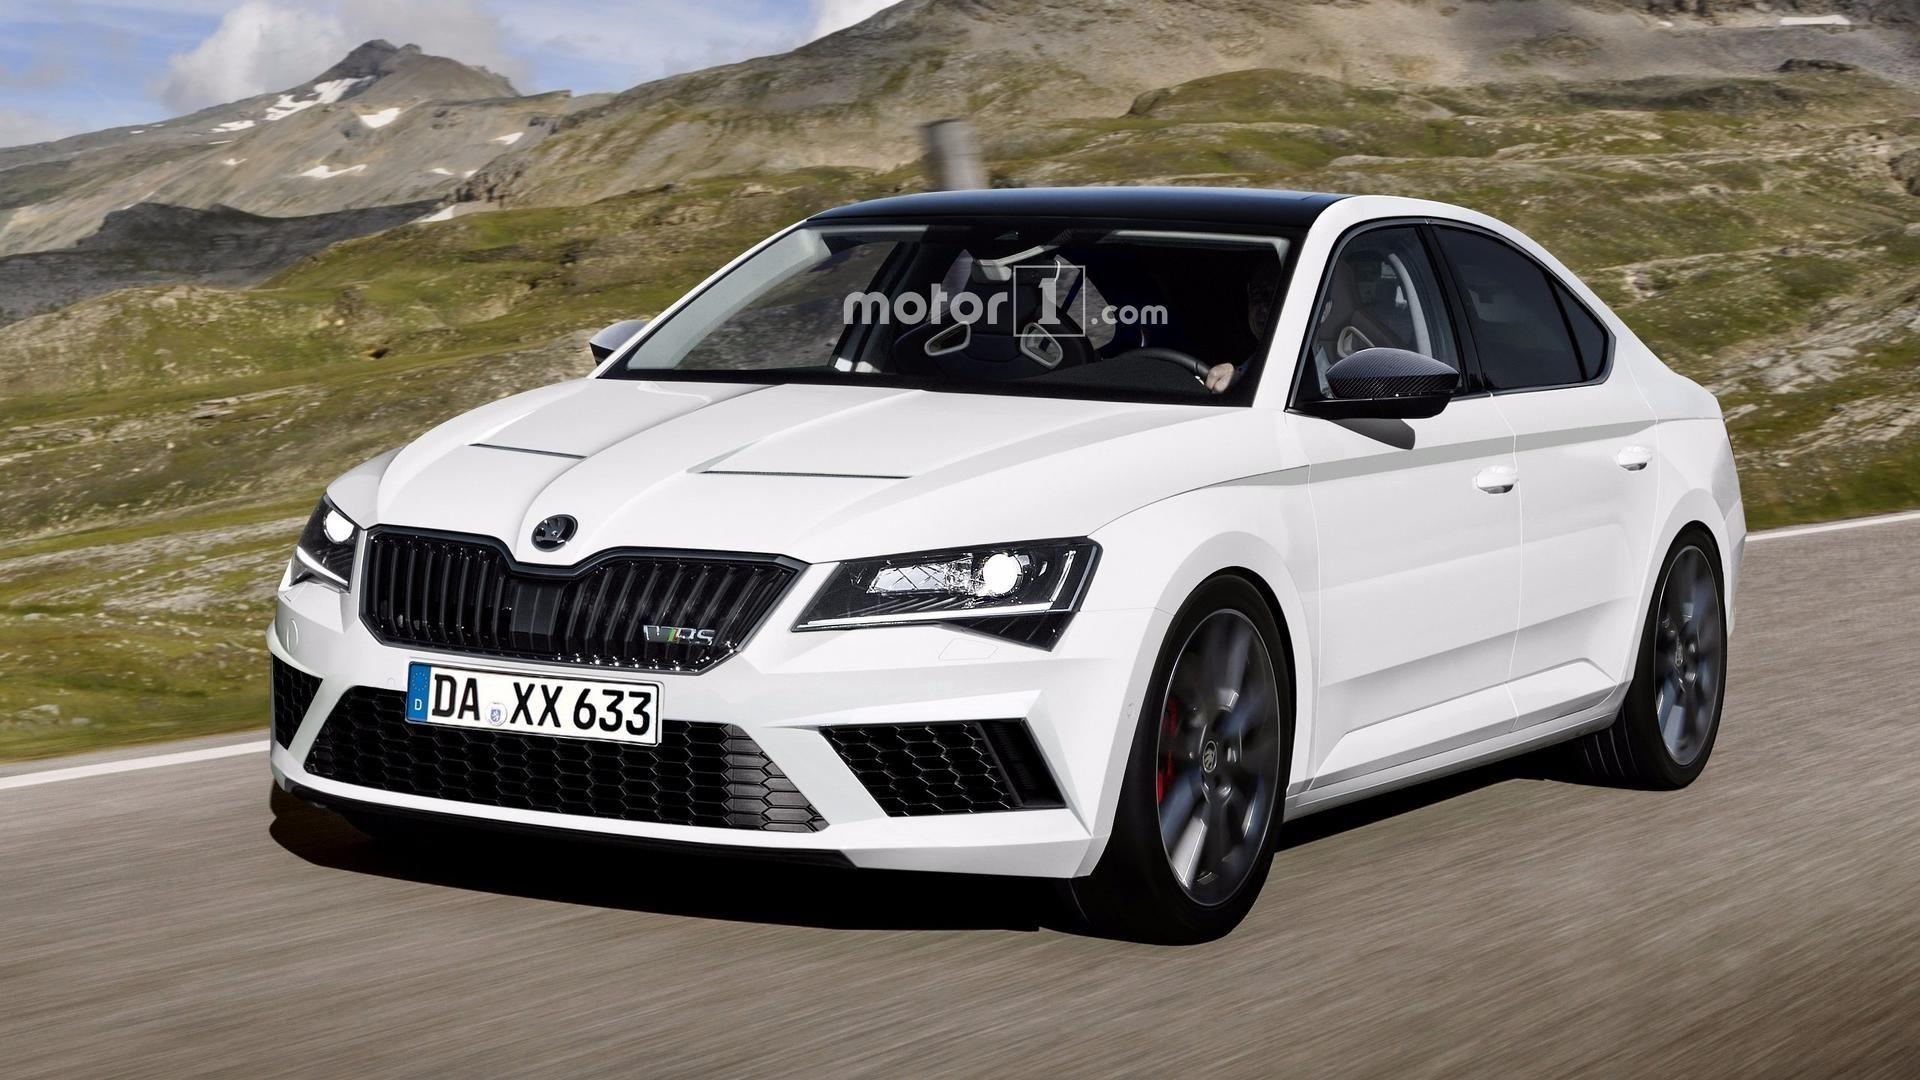 The Skoda Octavia Vrs 2019 Price, Design and Review. Cars Picture